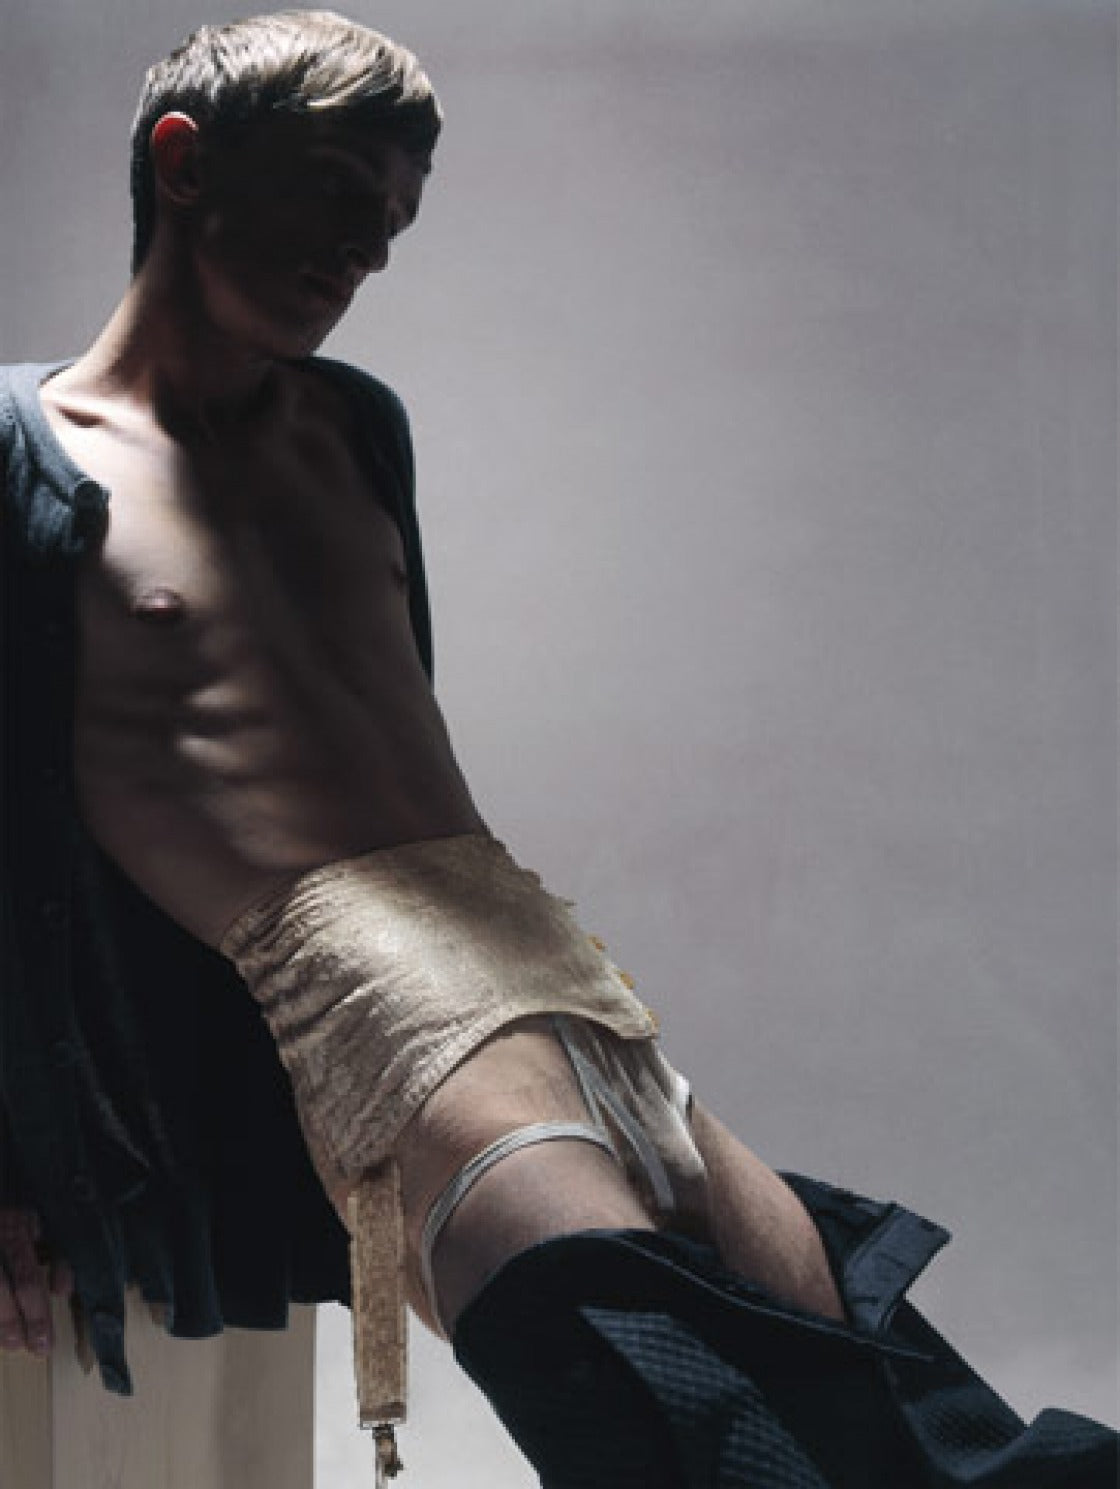 Underwear No.5 by Alister Mackie and Nick Knight